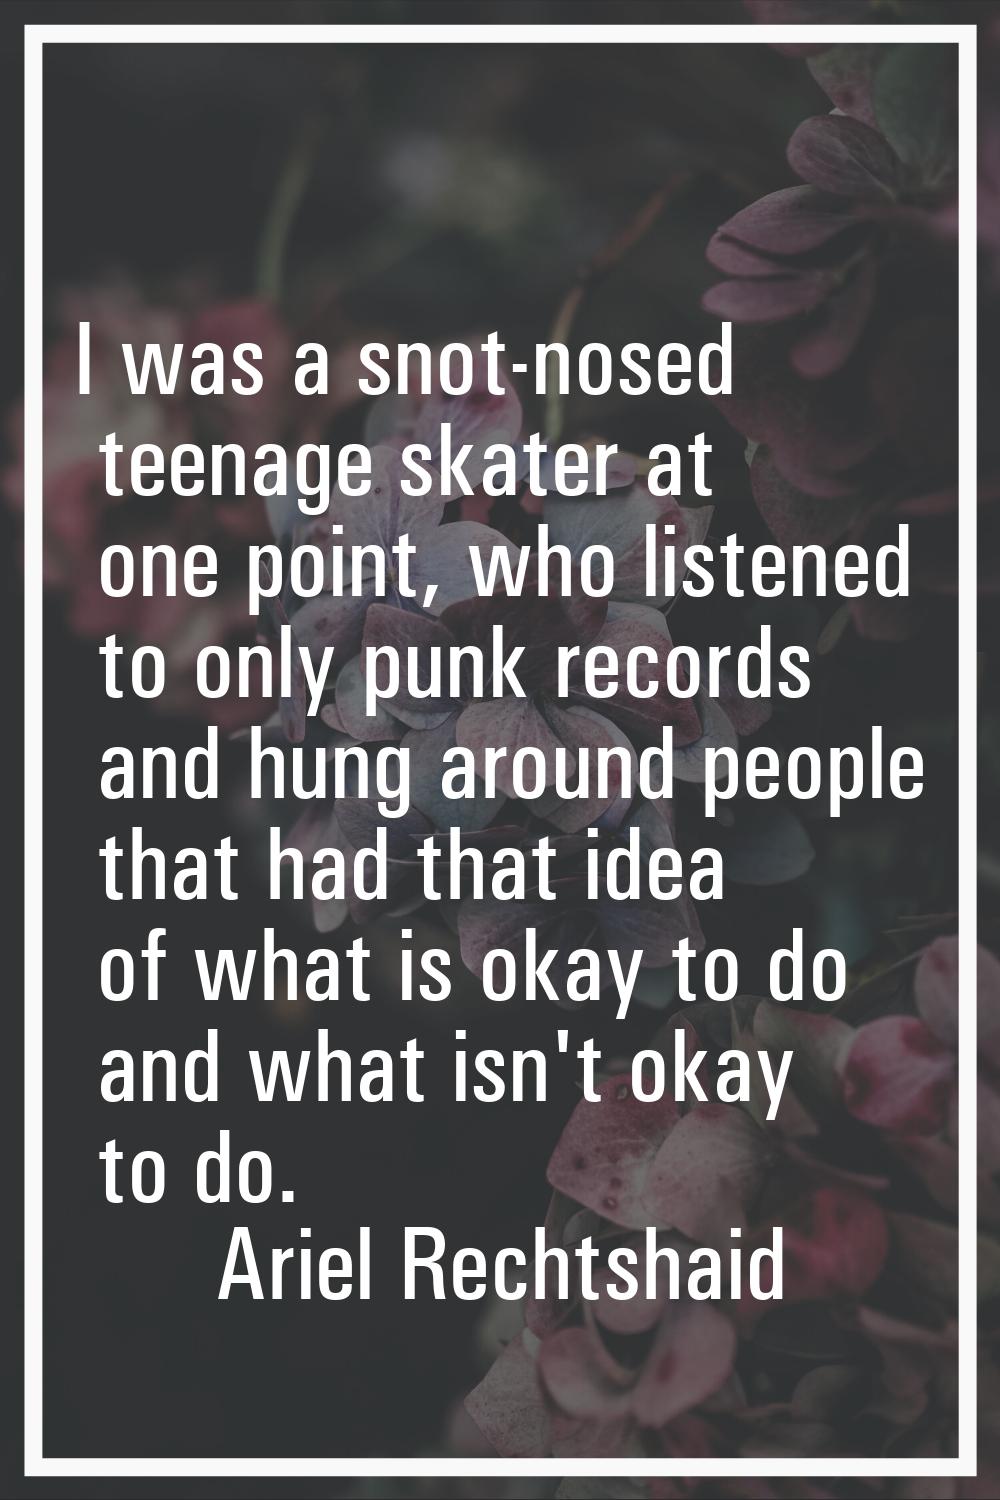 I was a snot-nosed teenage skater at one point, who listened to only punk records and hung around p